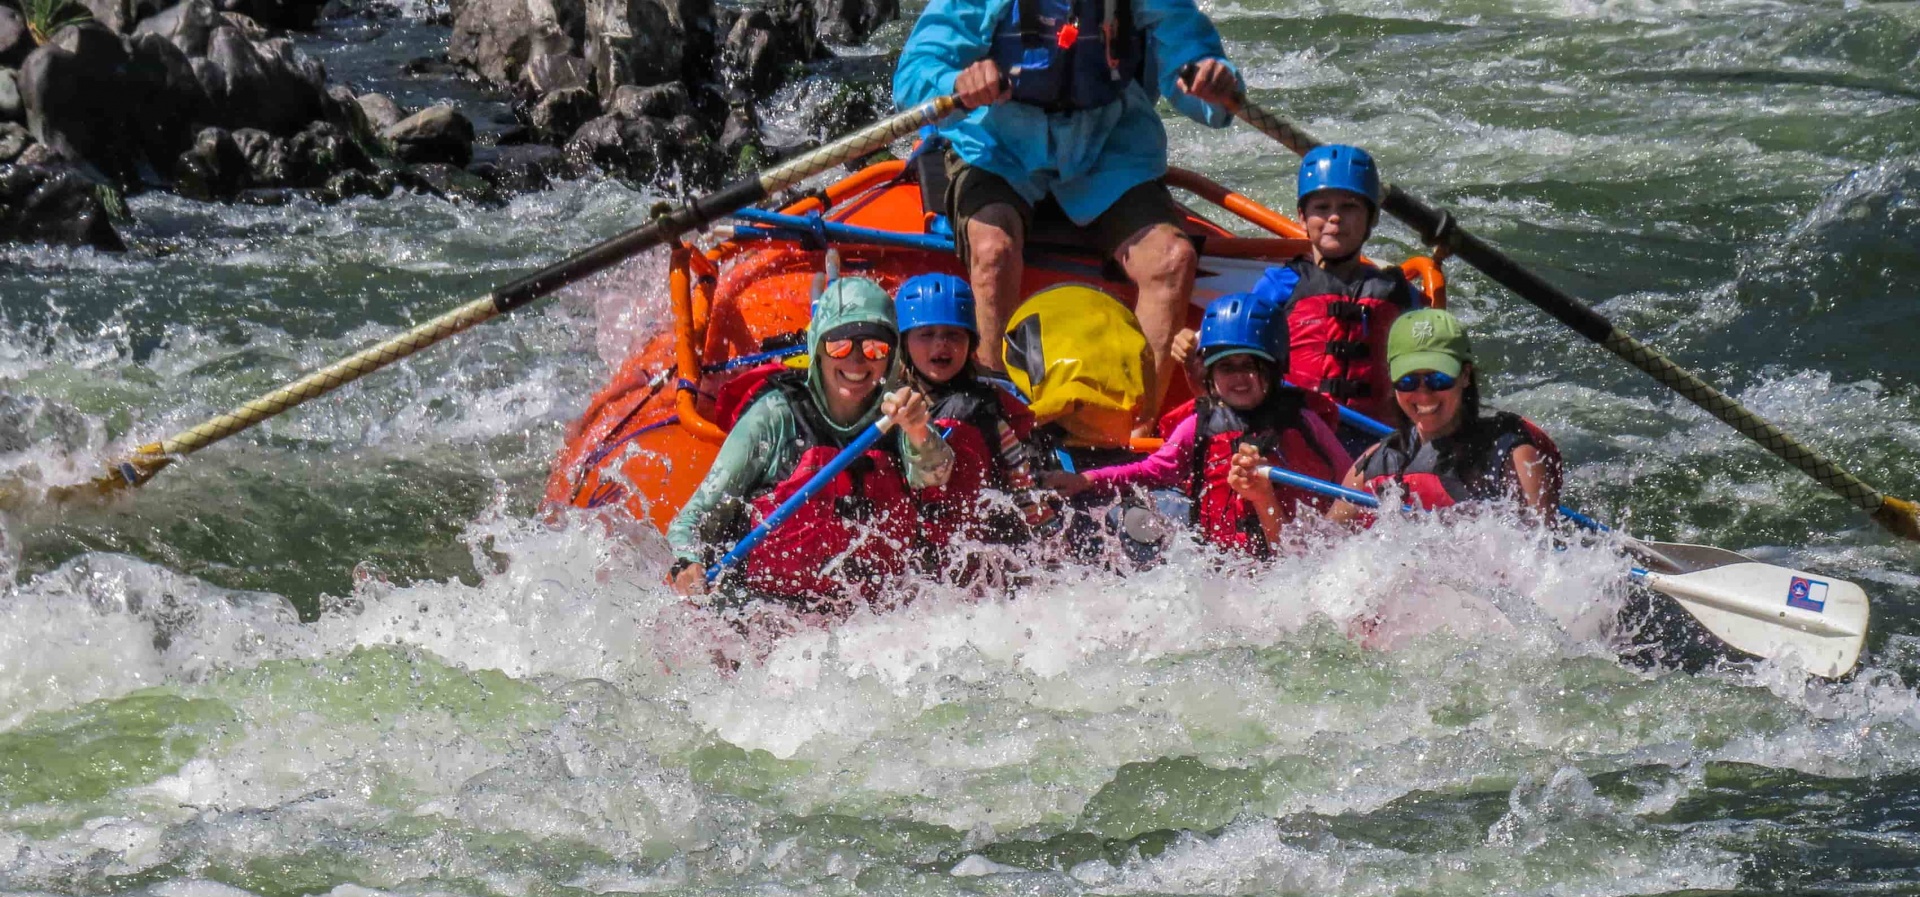 Family rafting at Russian Rapid on the Wild and Scenic Rogue River